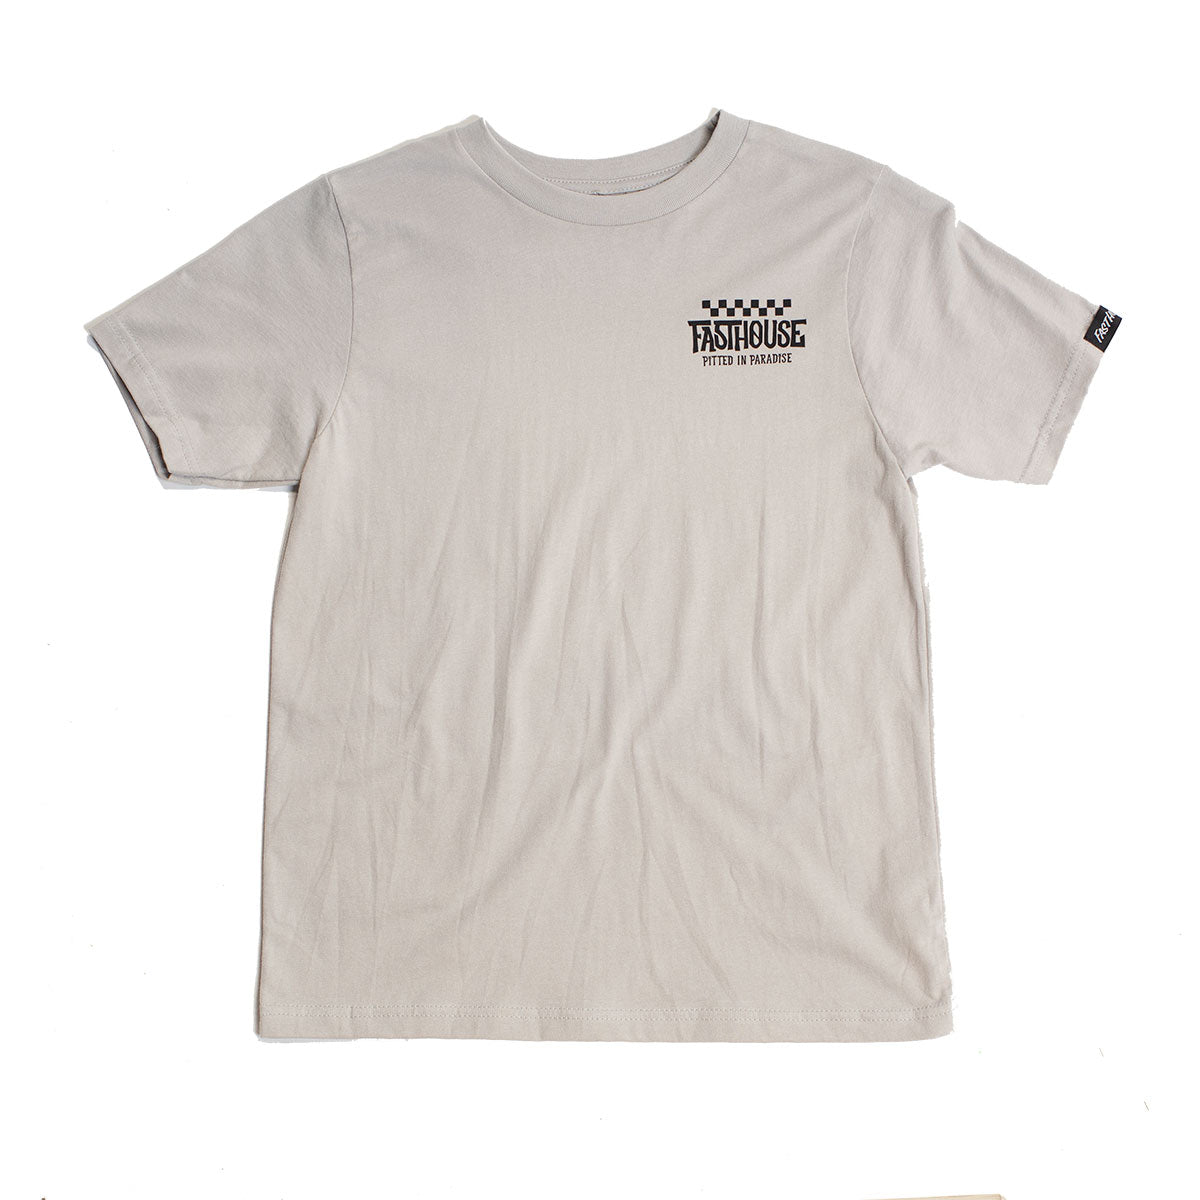 Pitted Youth Tee - Light Gray